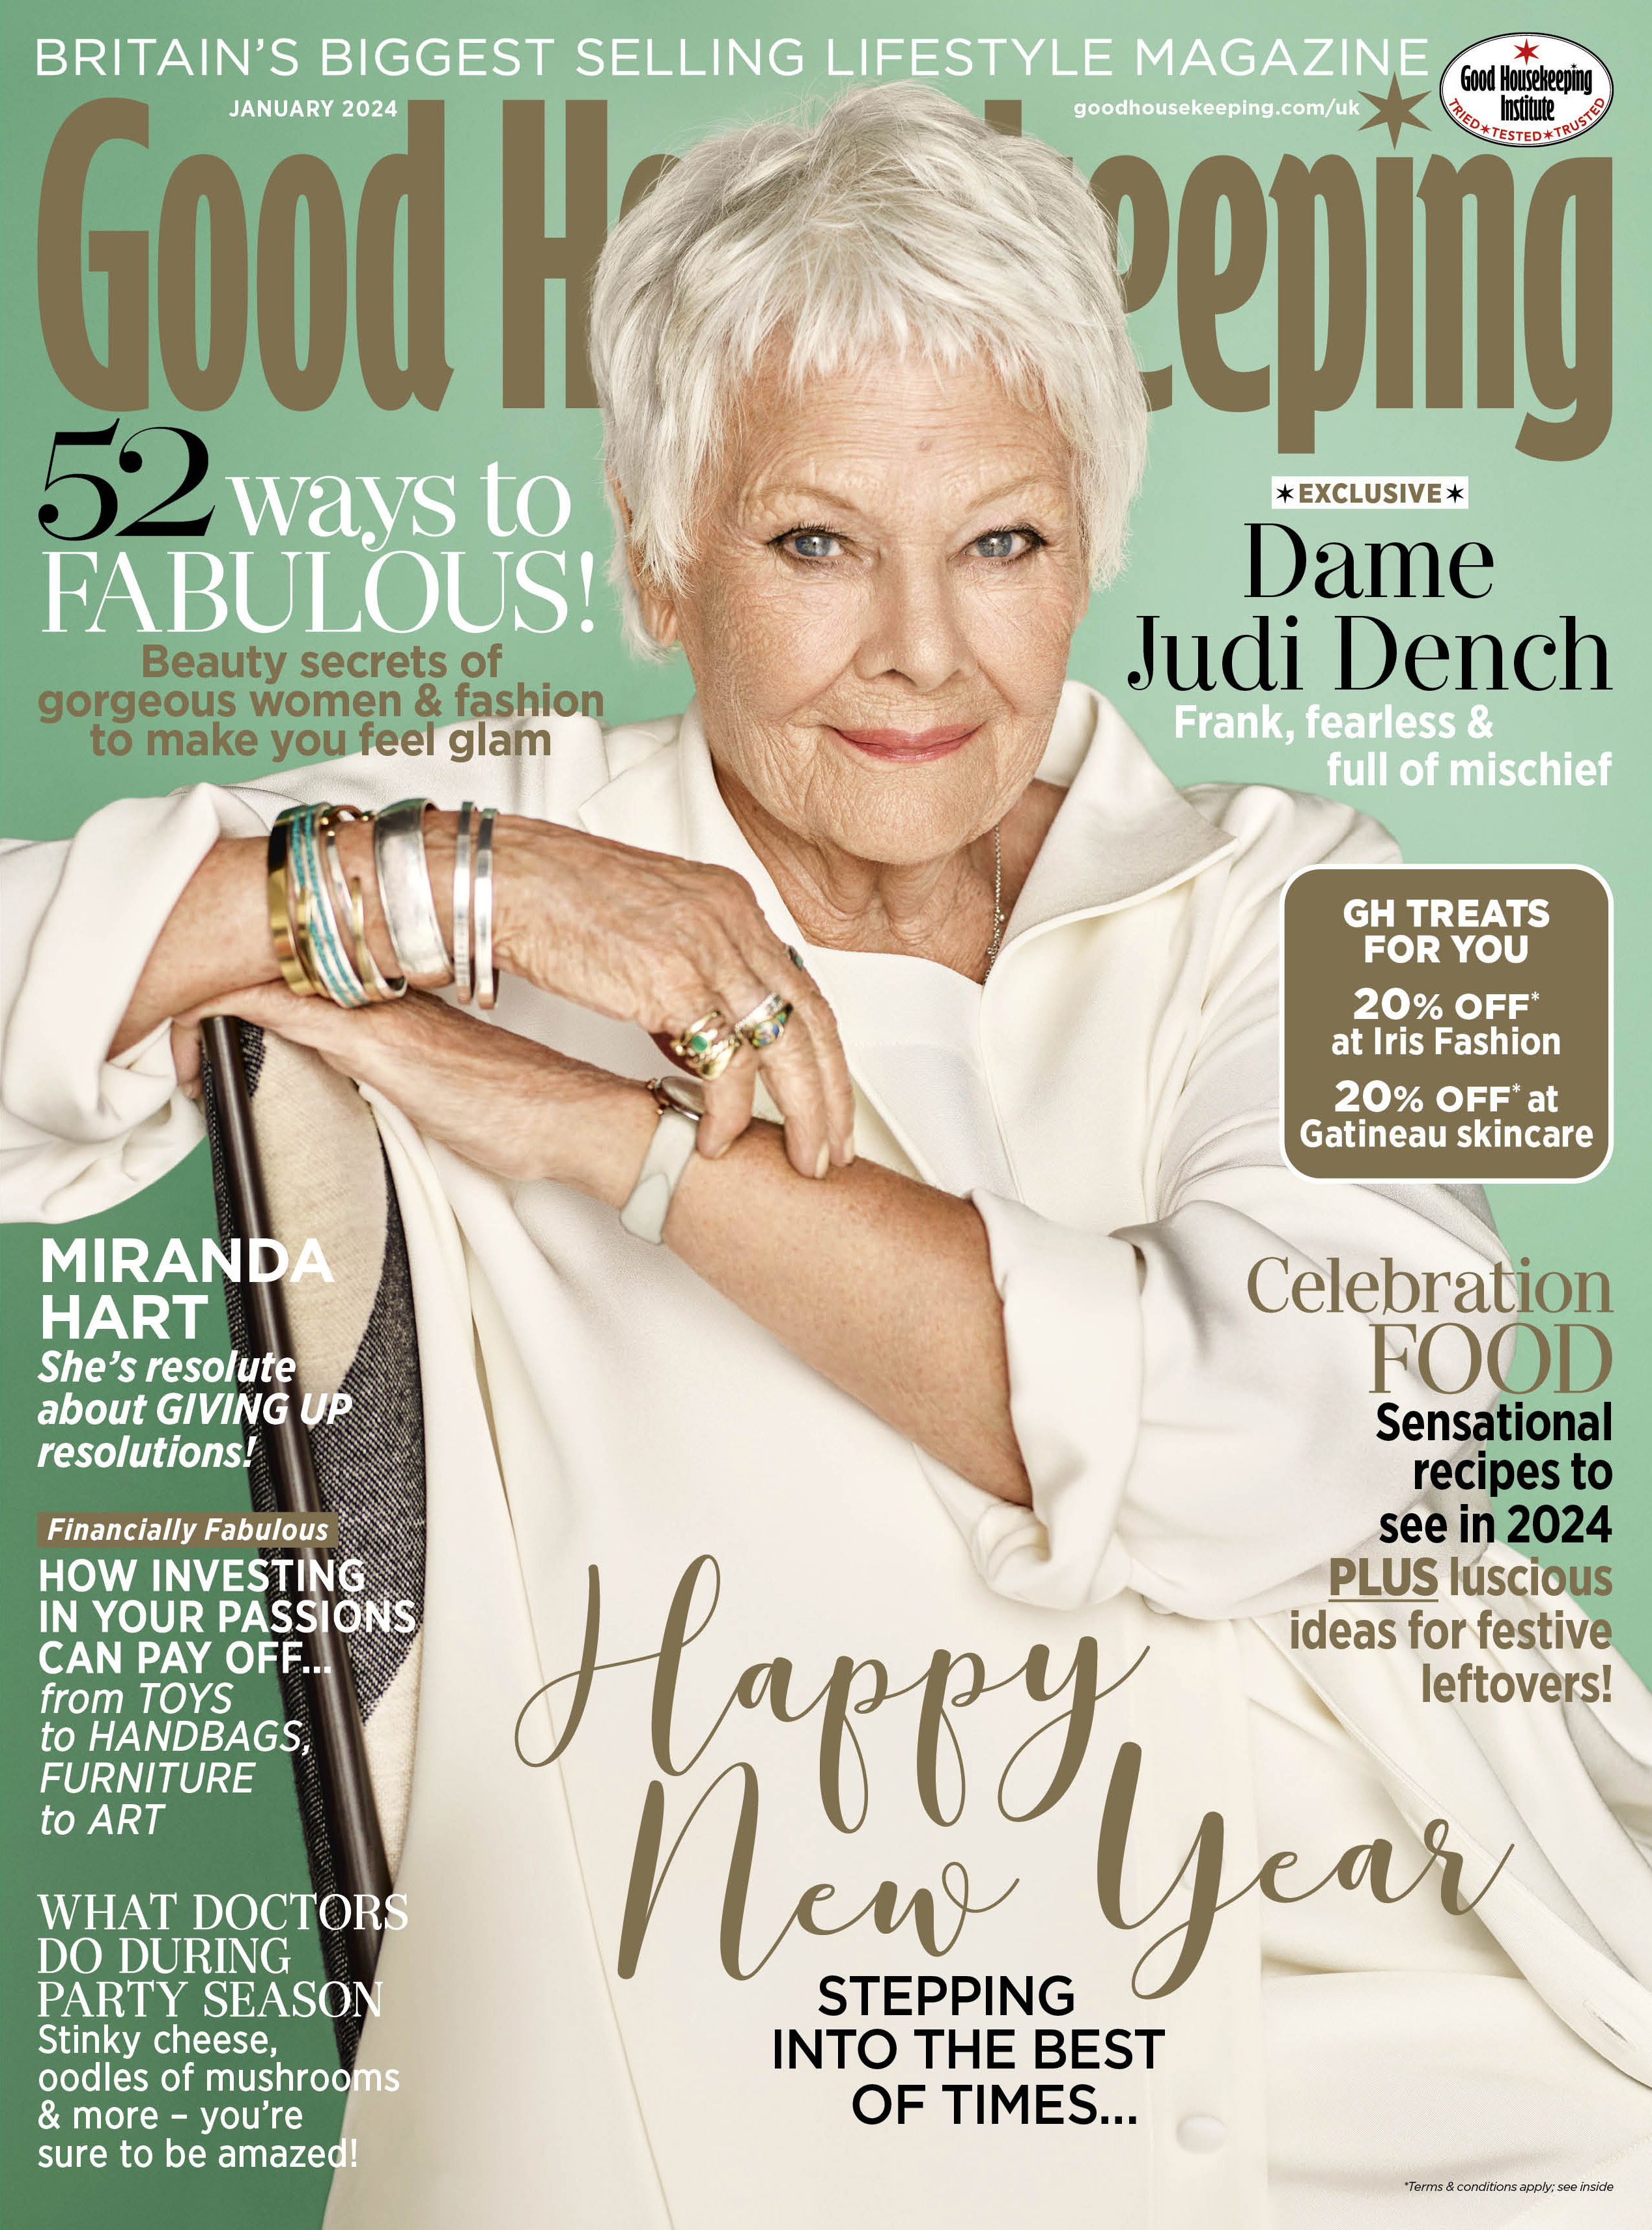 Dame Judi Dench on the cover of Good Housekeeping.